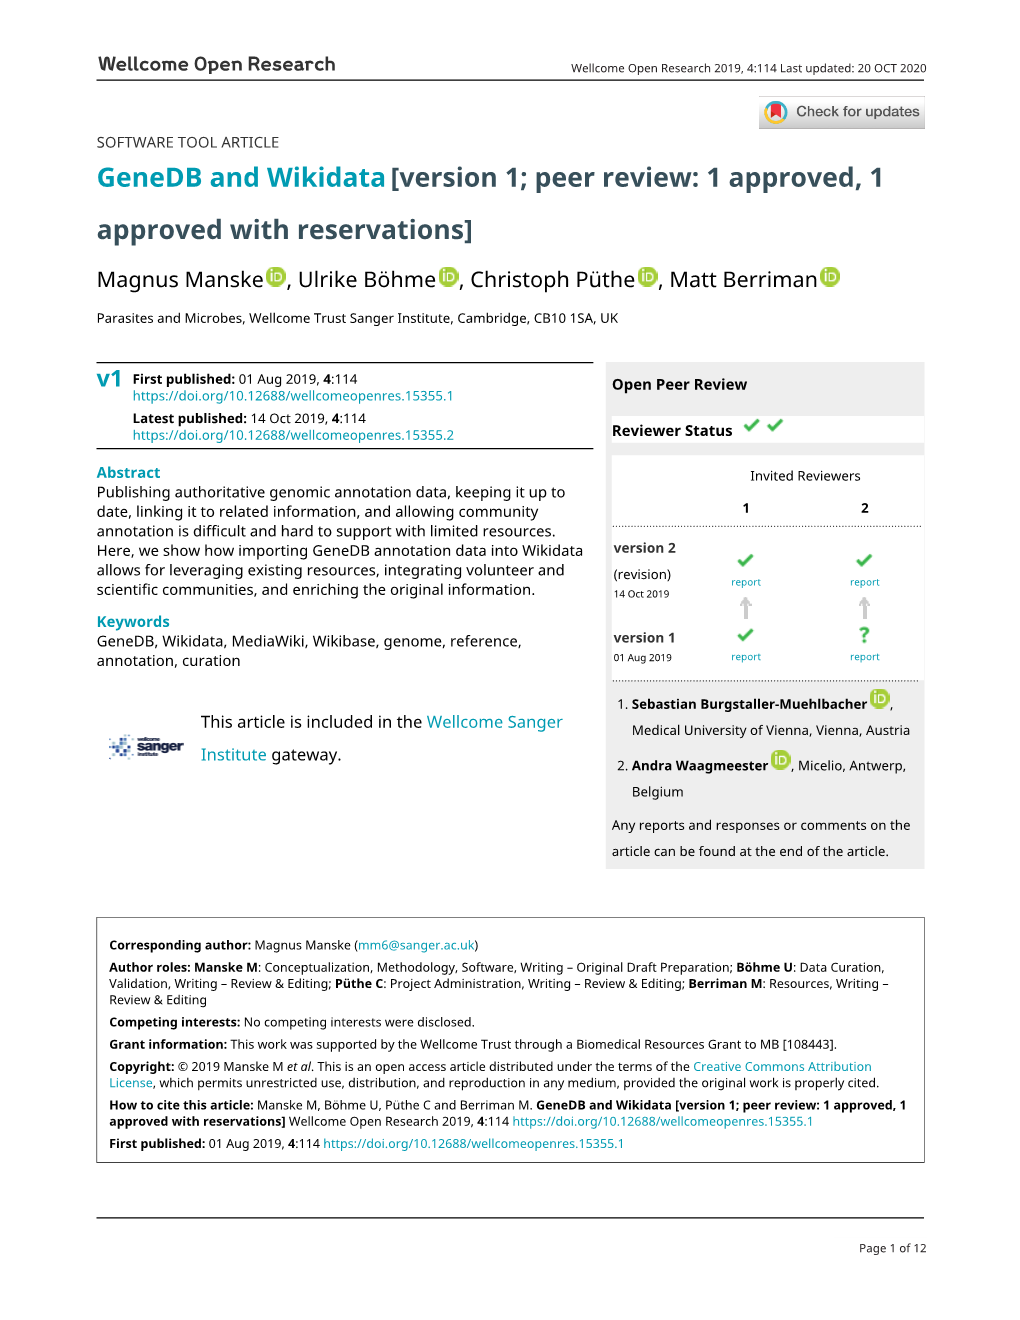 Genedb and Wikidata[Version 1; Peer Review: 1 Approved, 1 Approved with Reservations]